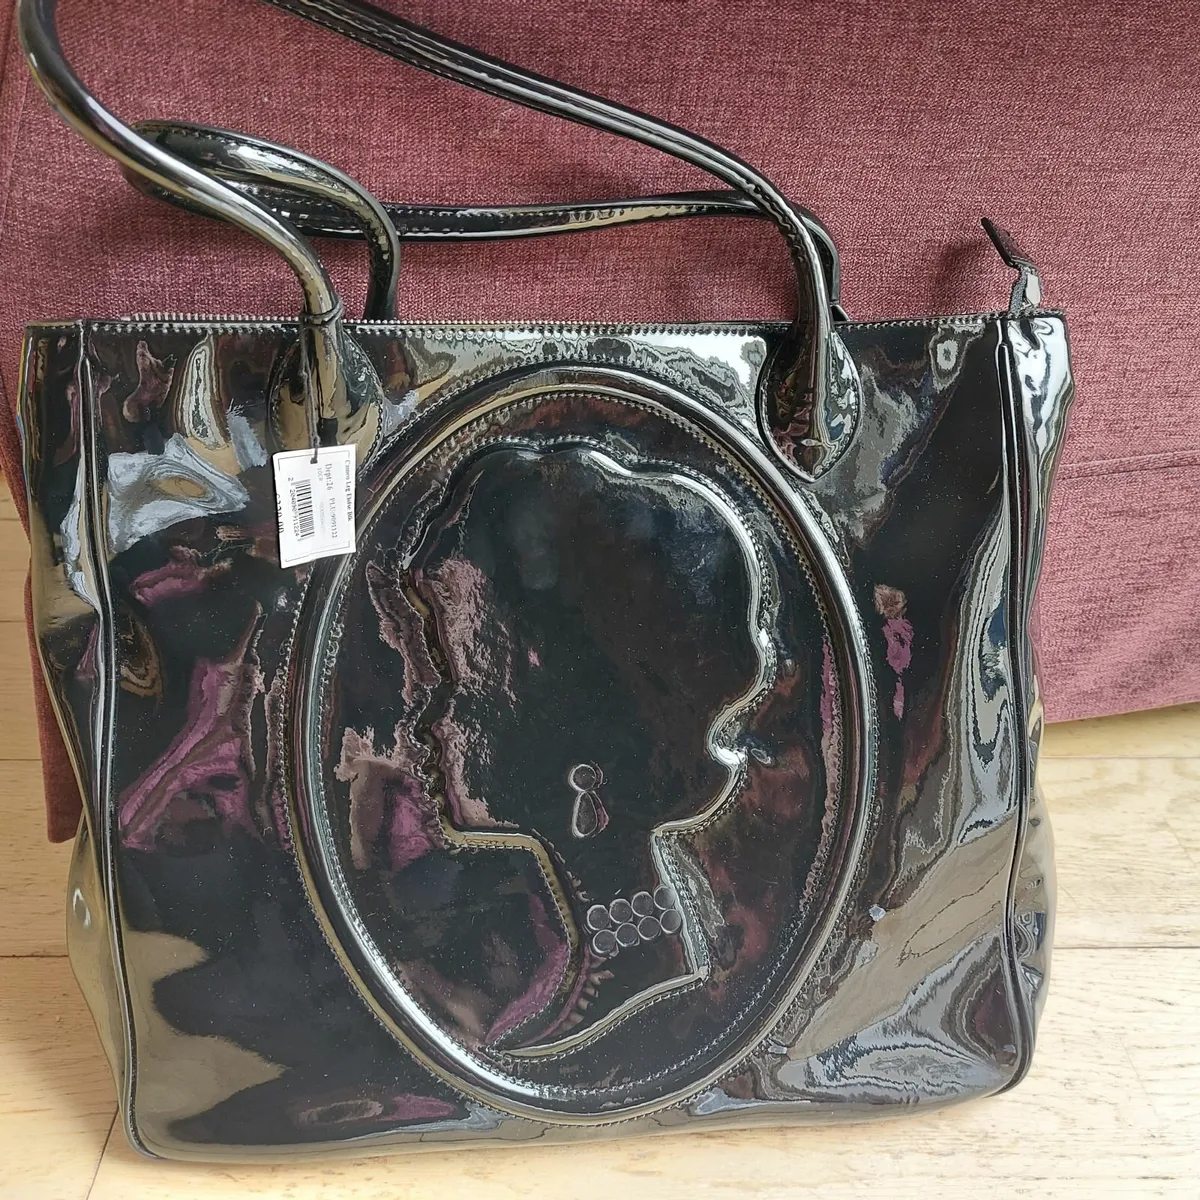 Lulu Guinness Bag, Brand new with tags